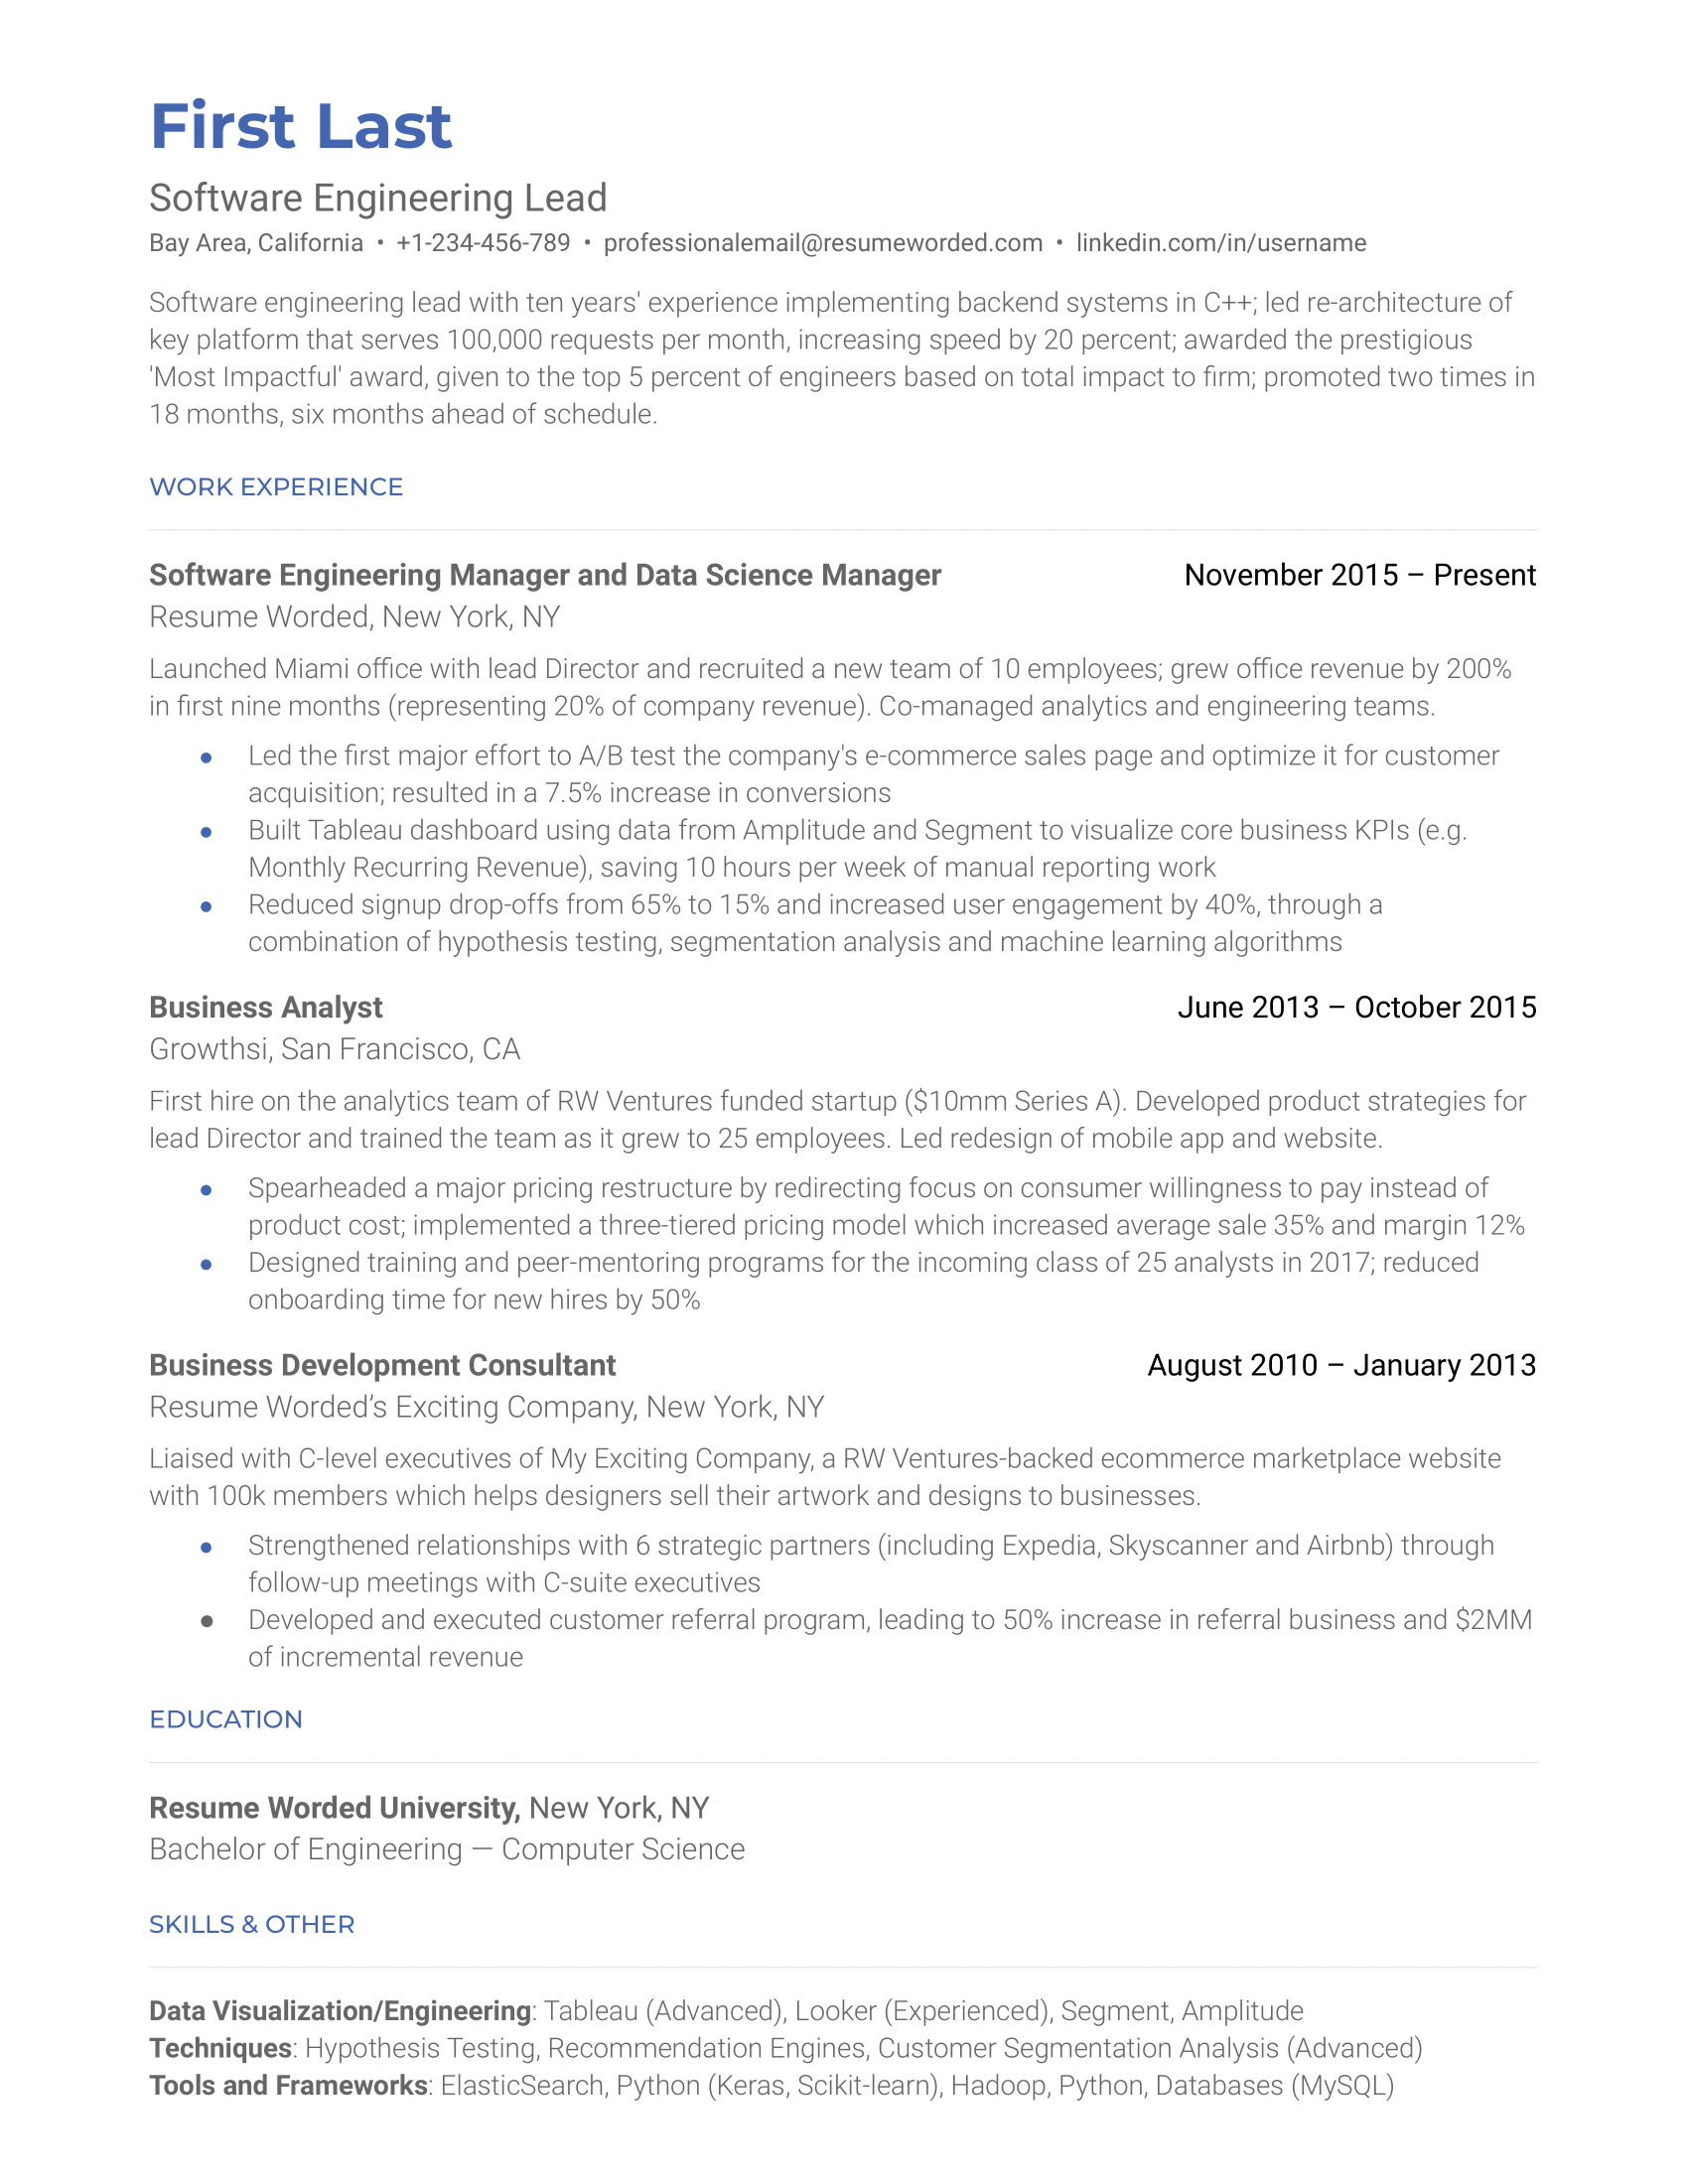 A software engineering lead can use a resume like this to emphasize their work experience.